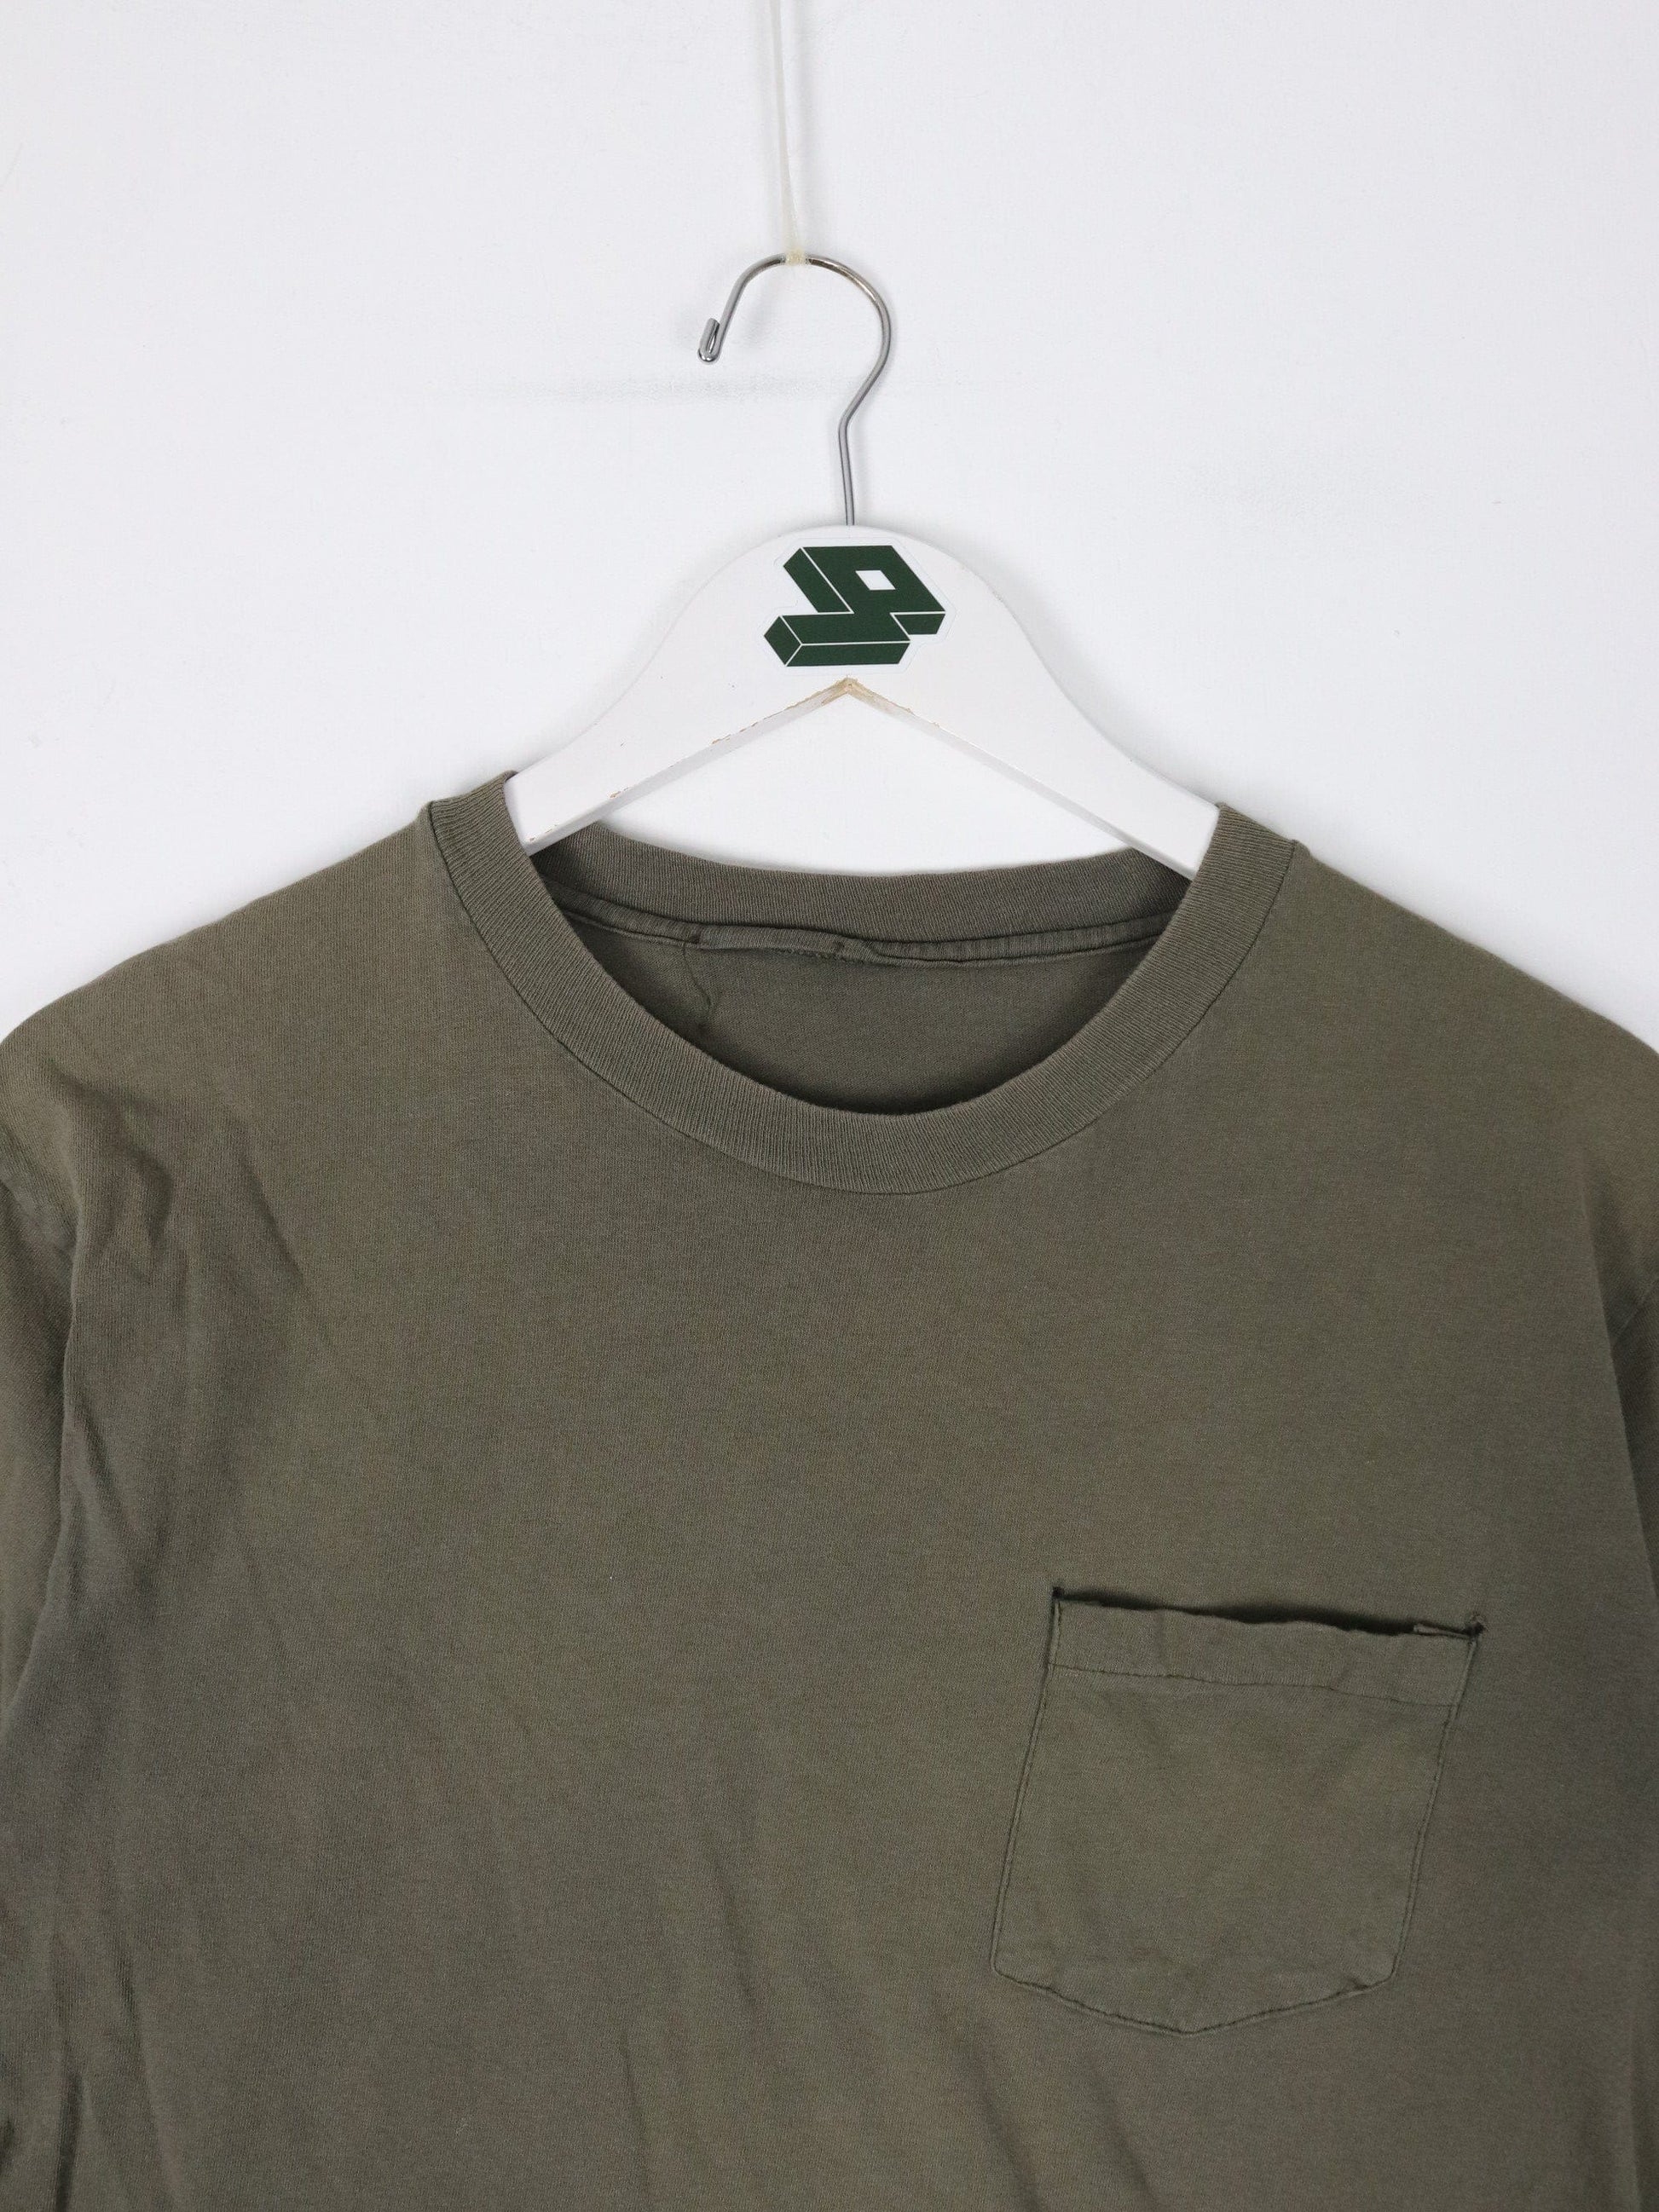 Other T-Shirts & Tank Tops Vintage T Shirt Mens Small Green Pocket Blank 90s